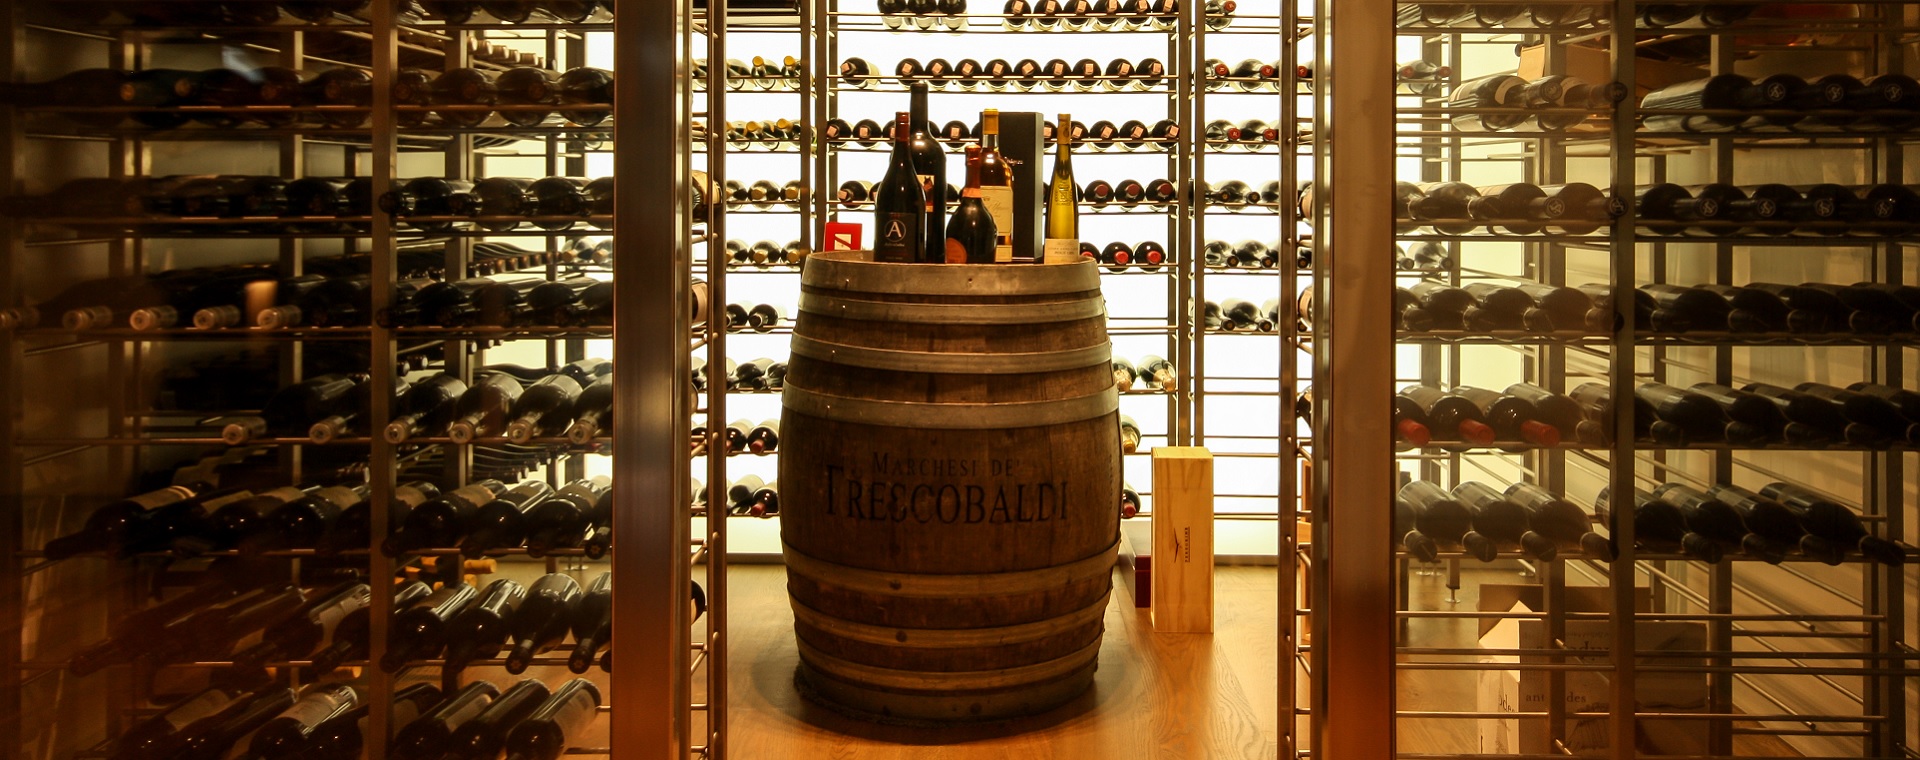 Automated and temperature controlled wine cellar featuring a wine barrel used as a bench